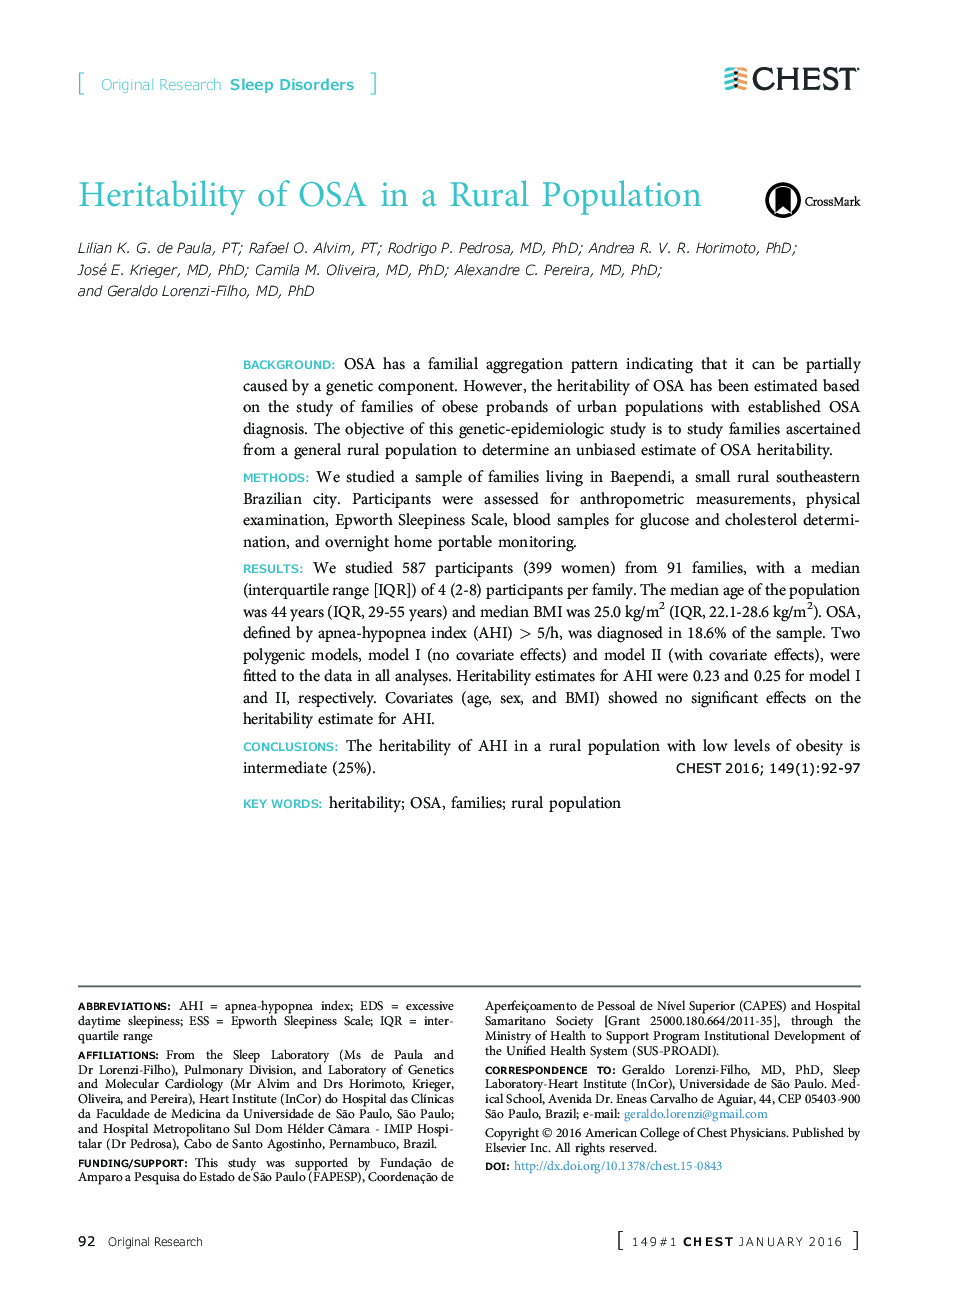 Heritability of OSA in a Rural Population